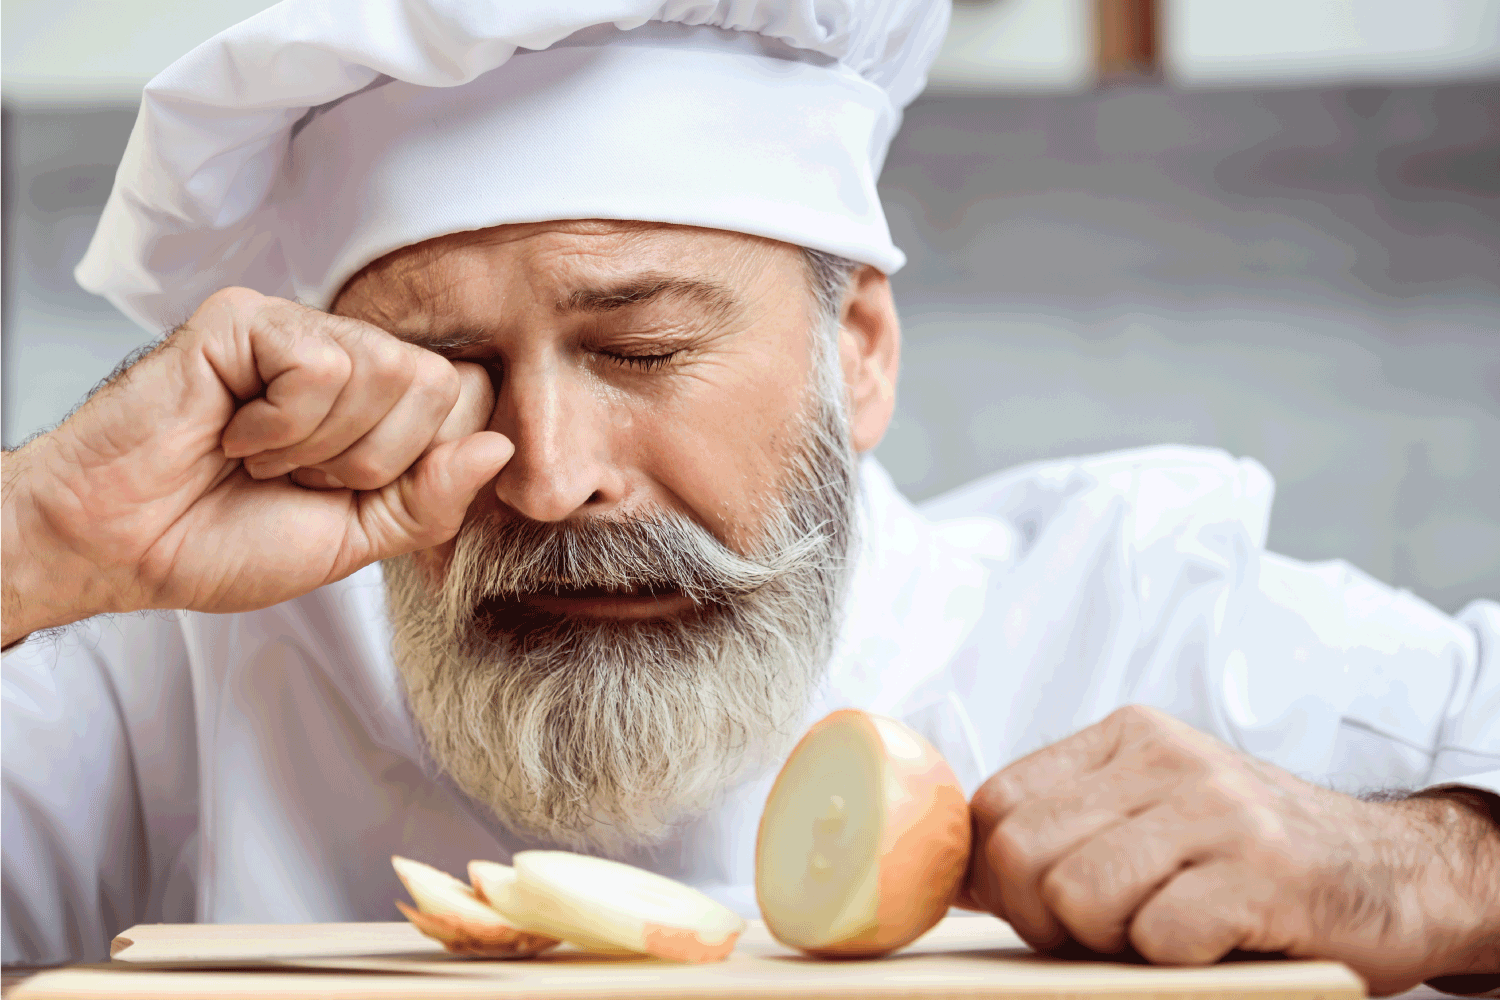 Master chef cutting onion with tears in his eyes